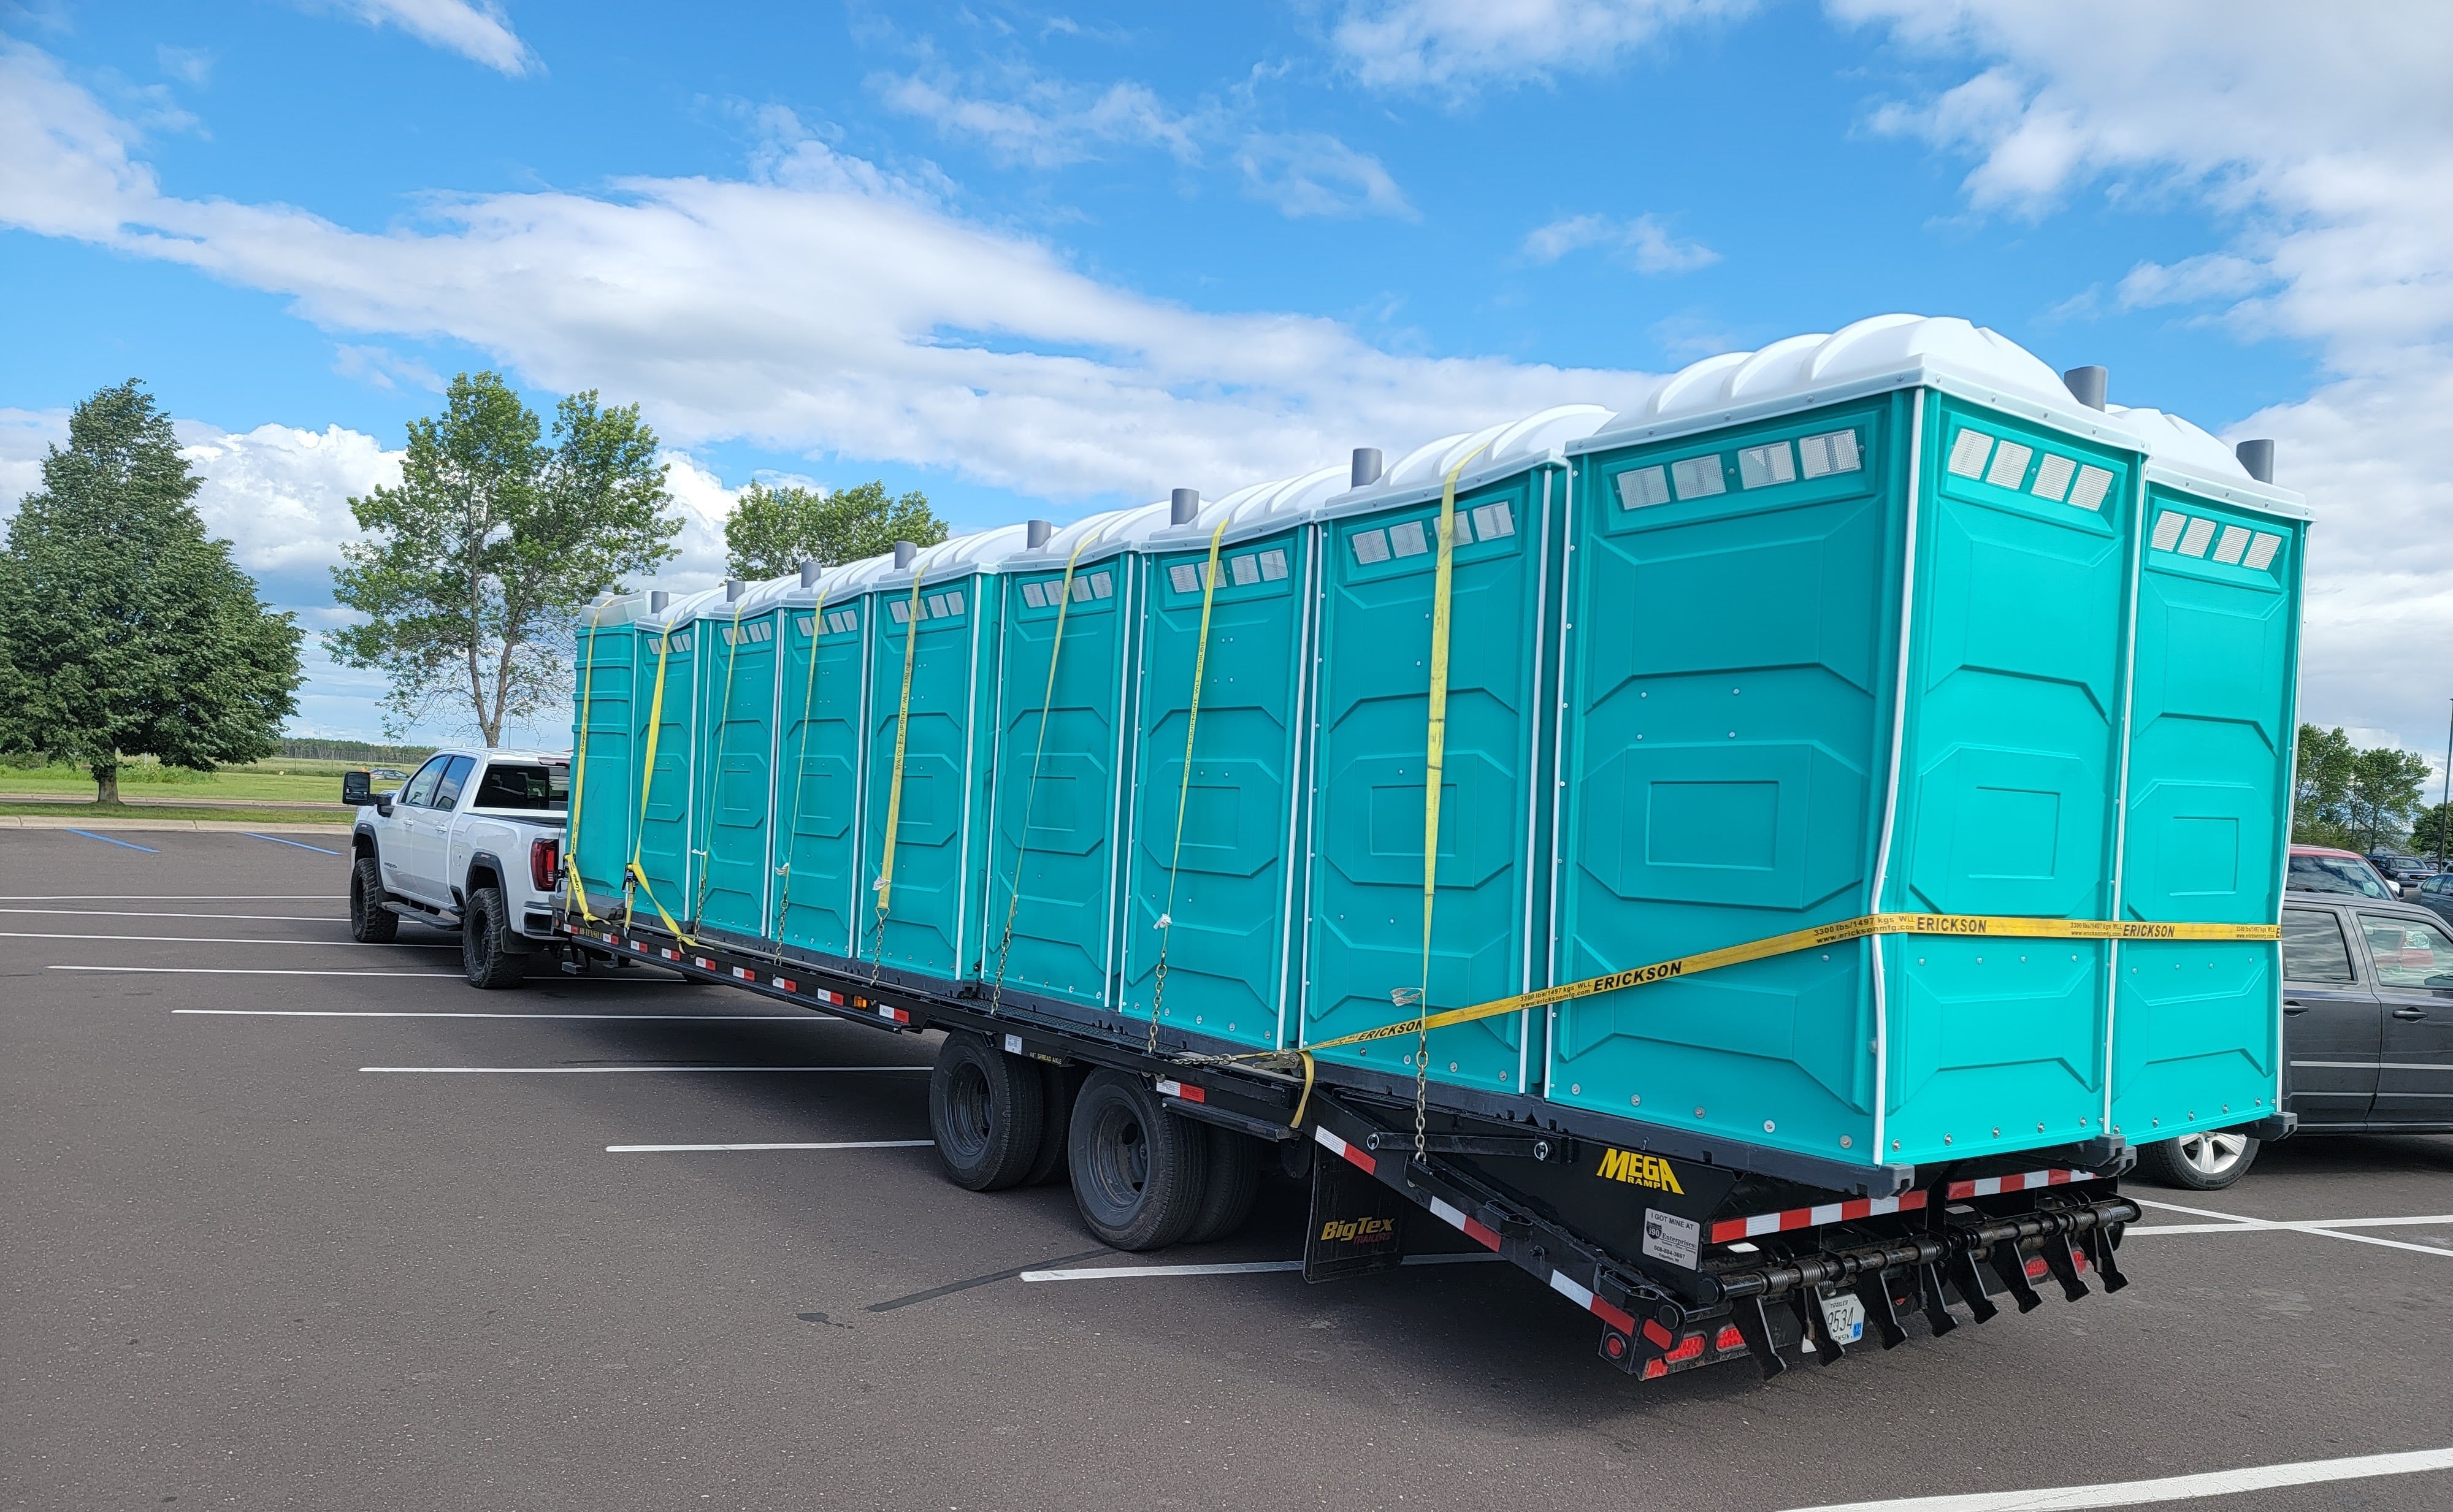 Portable Restrooms Being Transported